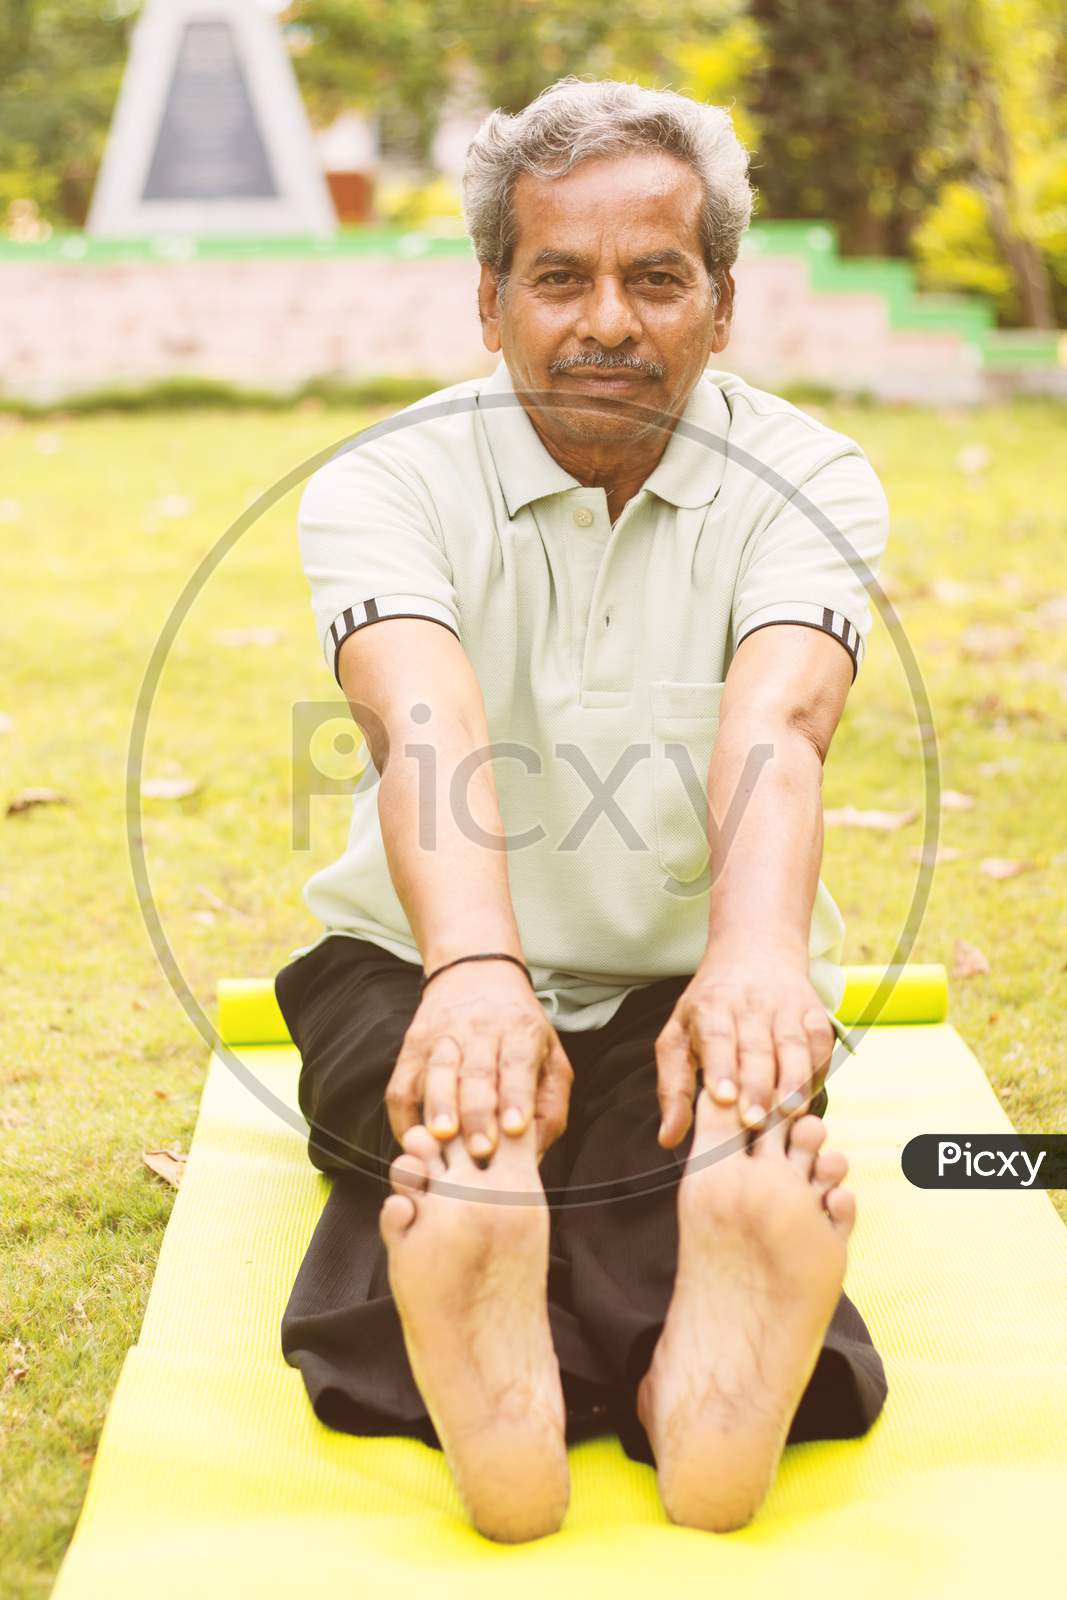 Low-Angle Full Length View Of A Old Man Sitting Down On Exercise Or Yoga Mat Touching His Toes - Concept Of Active Happy Elderly Health And Fitness